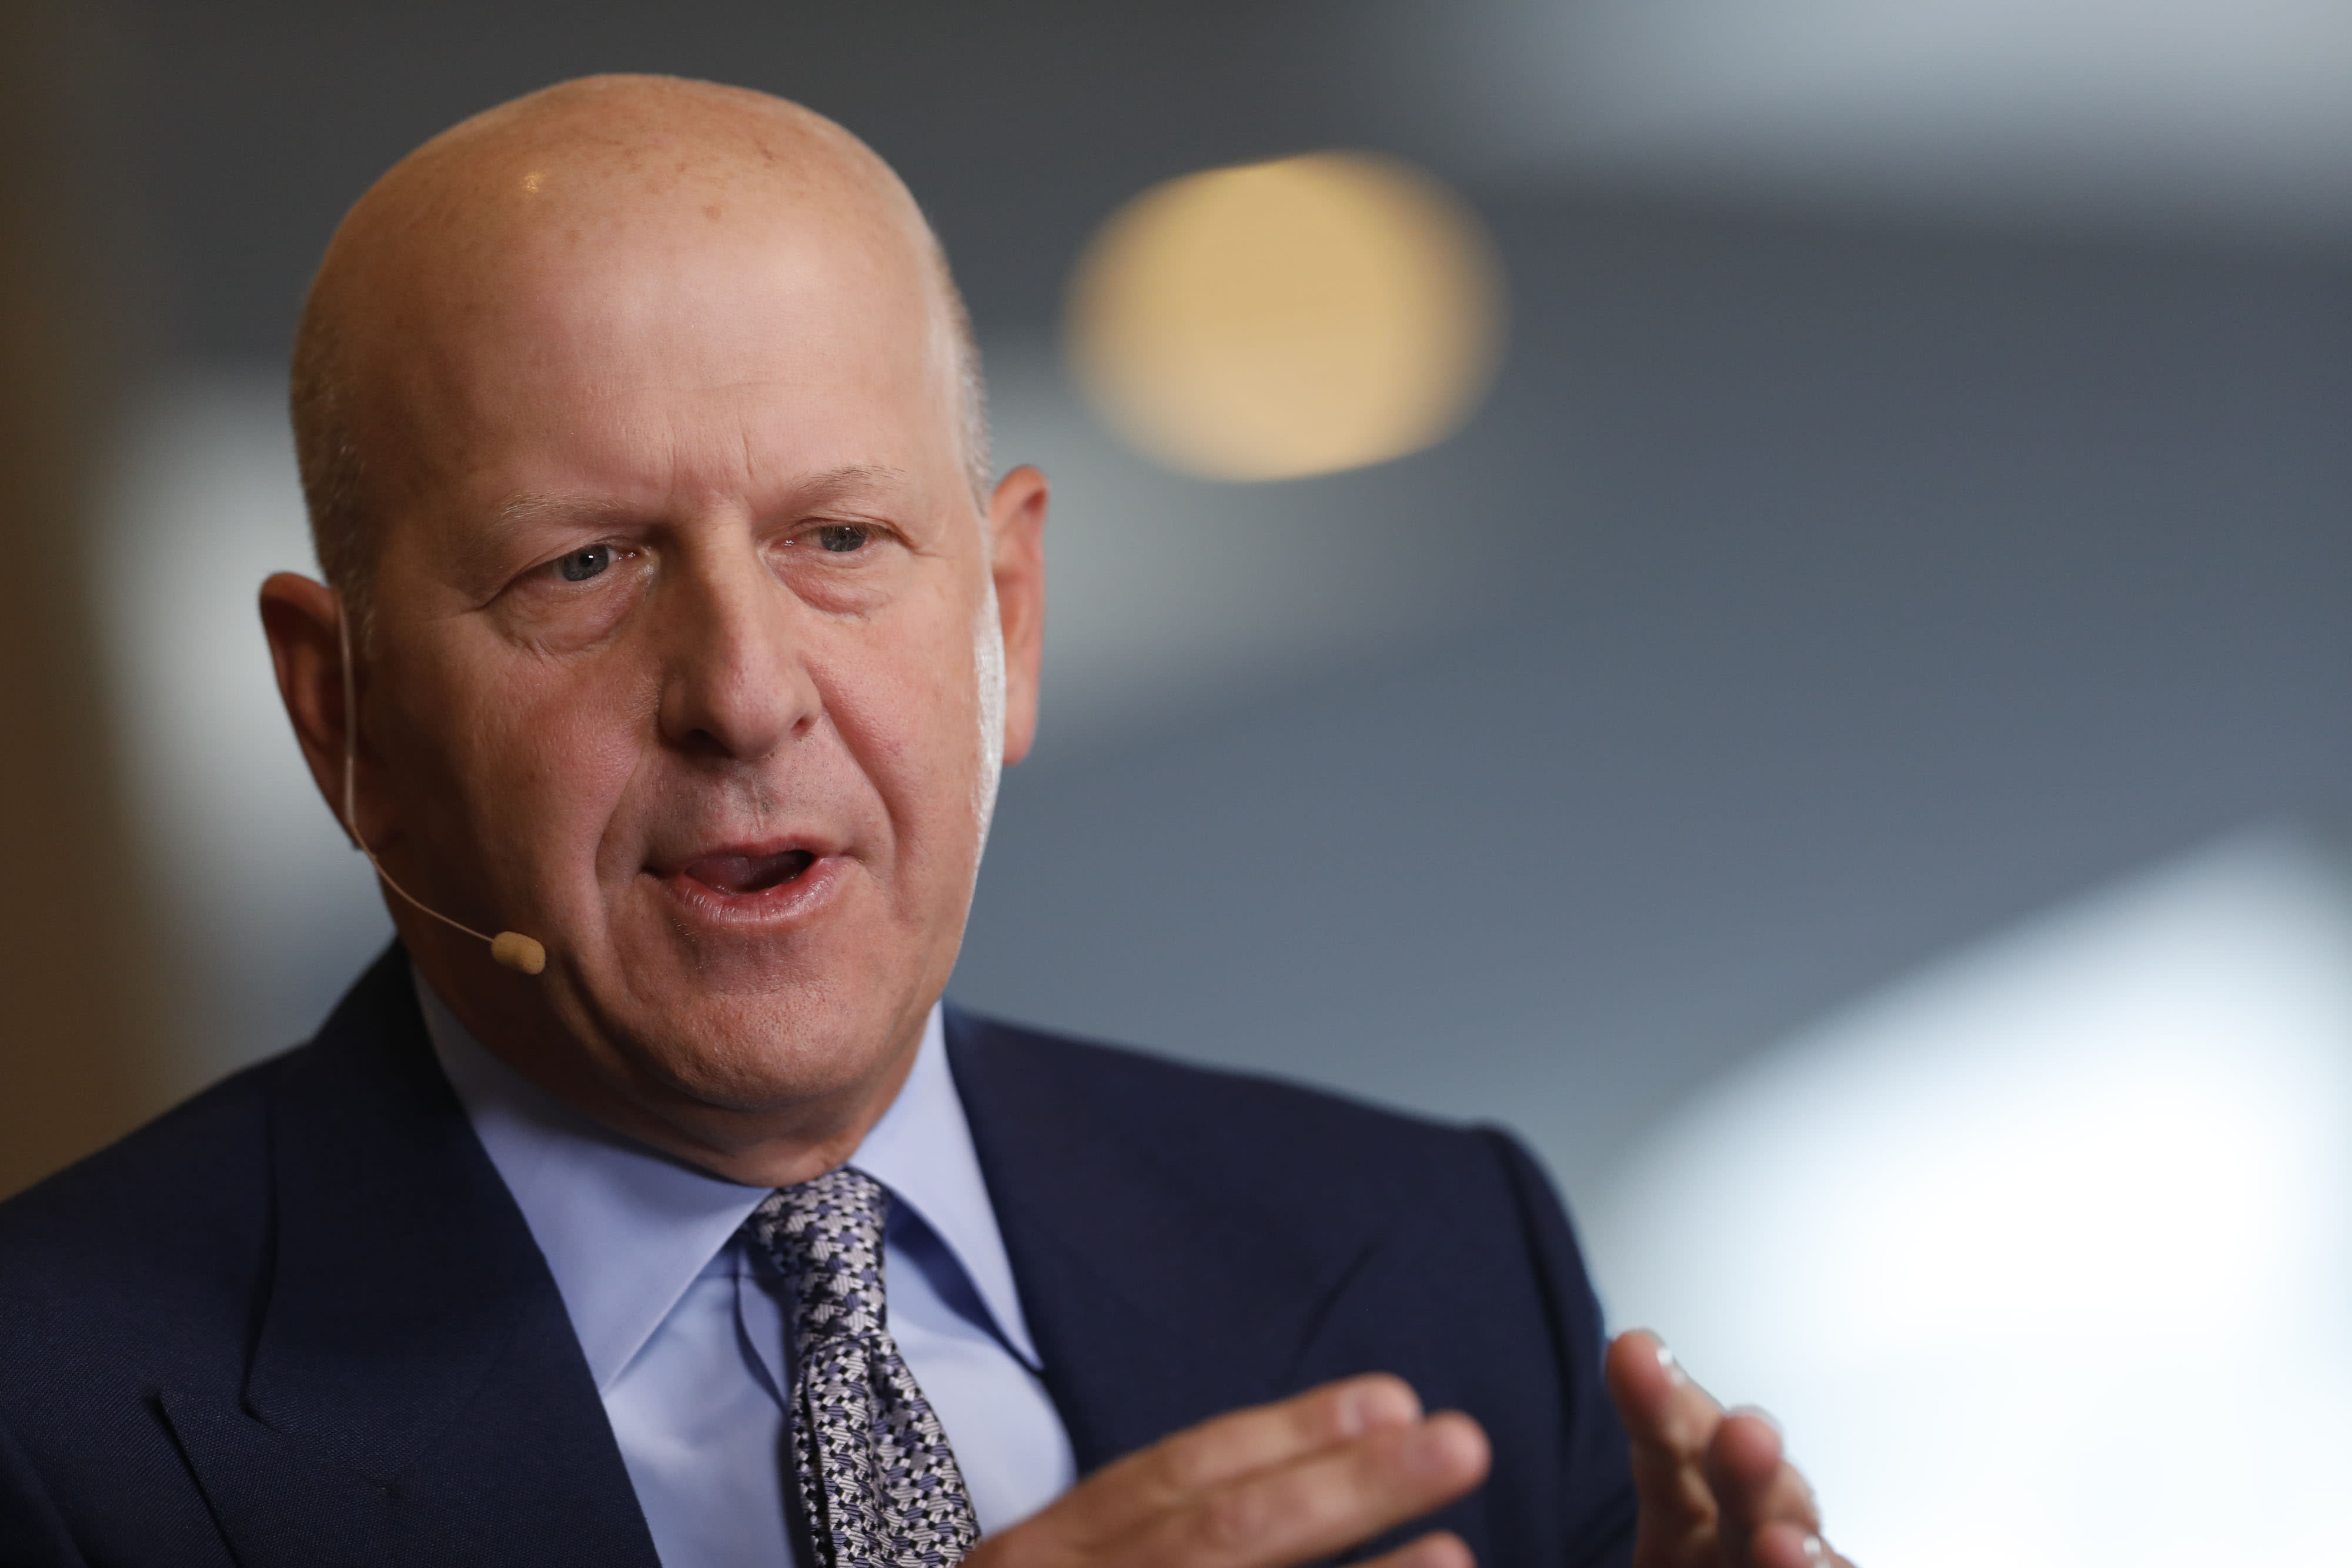 Goldman Sachs CEO 'A lot of opportunity' in the U.S. for college